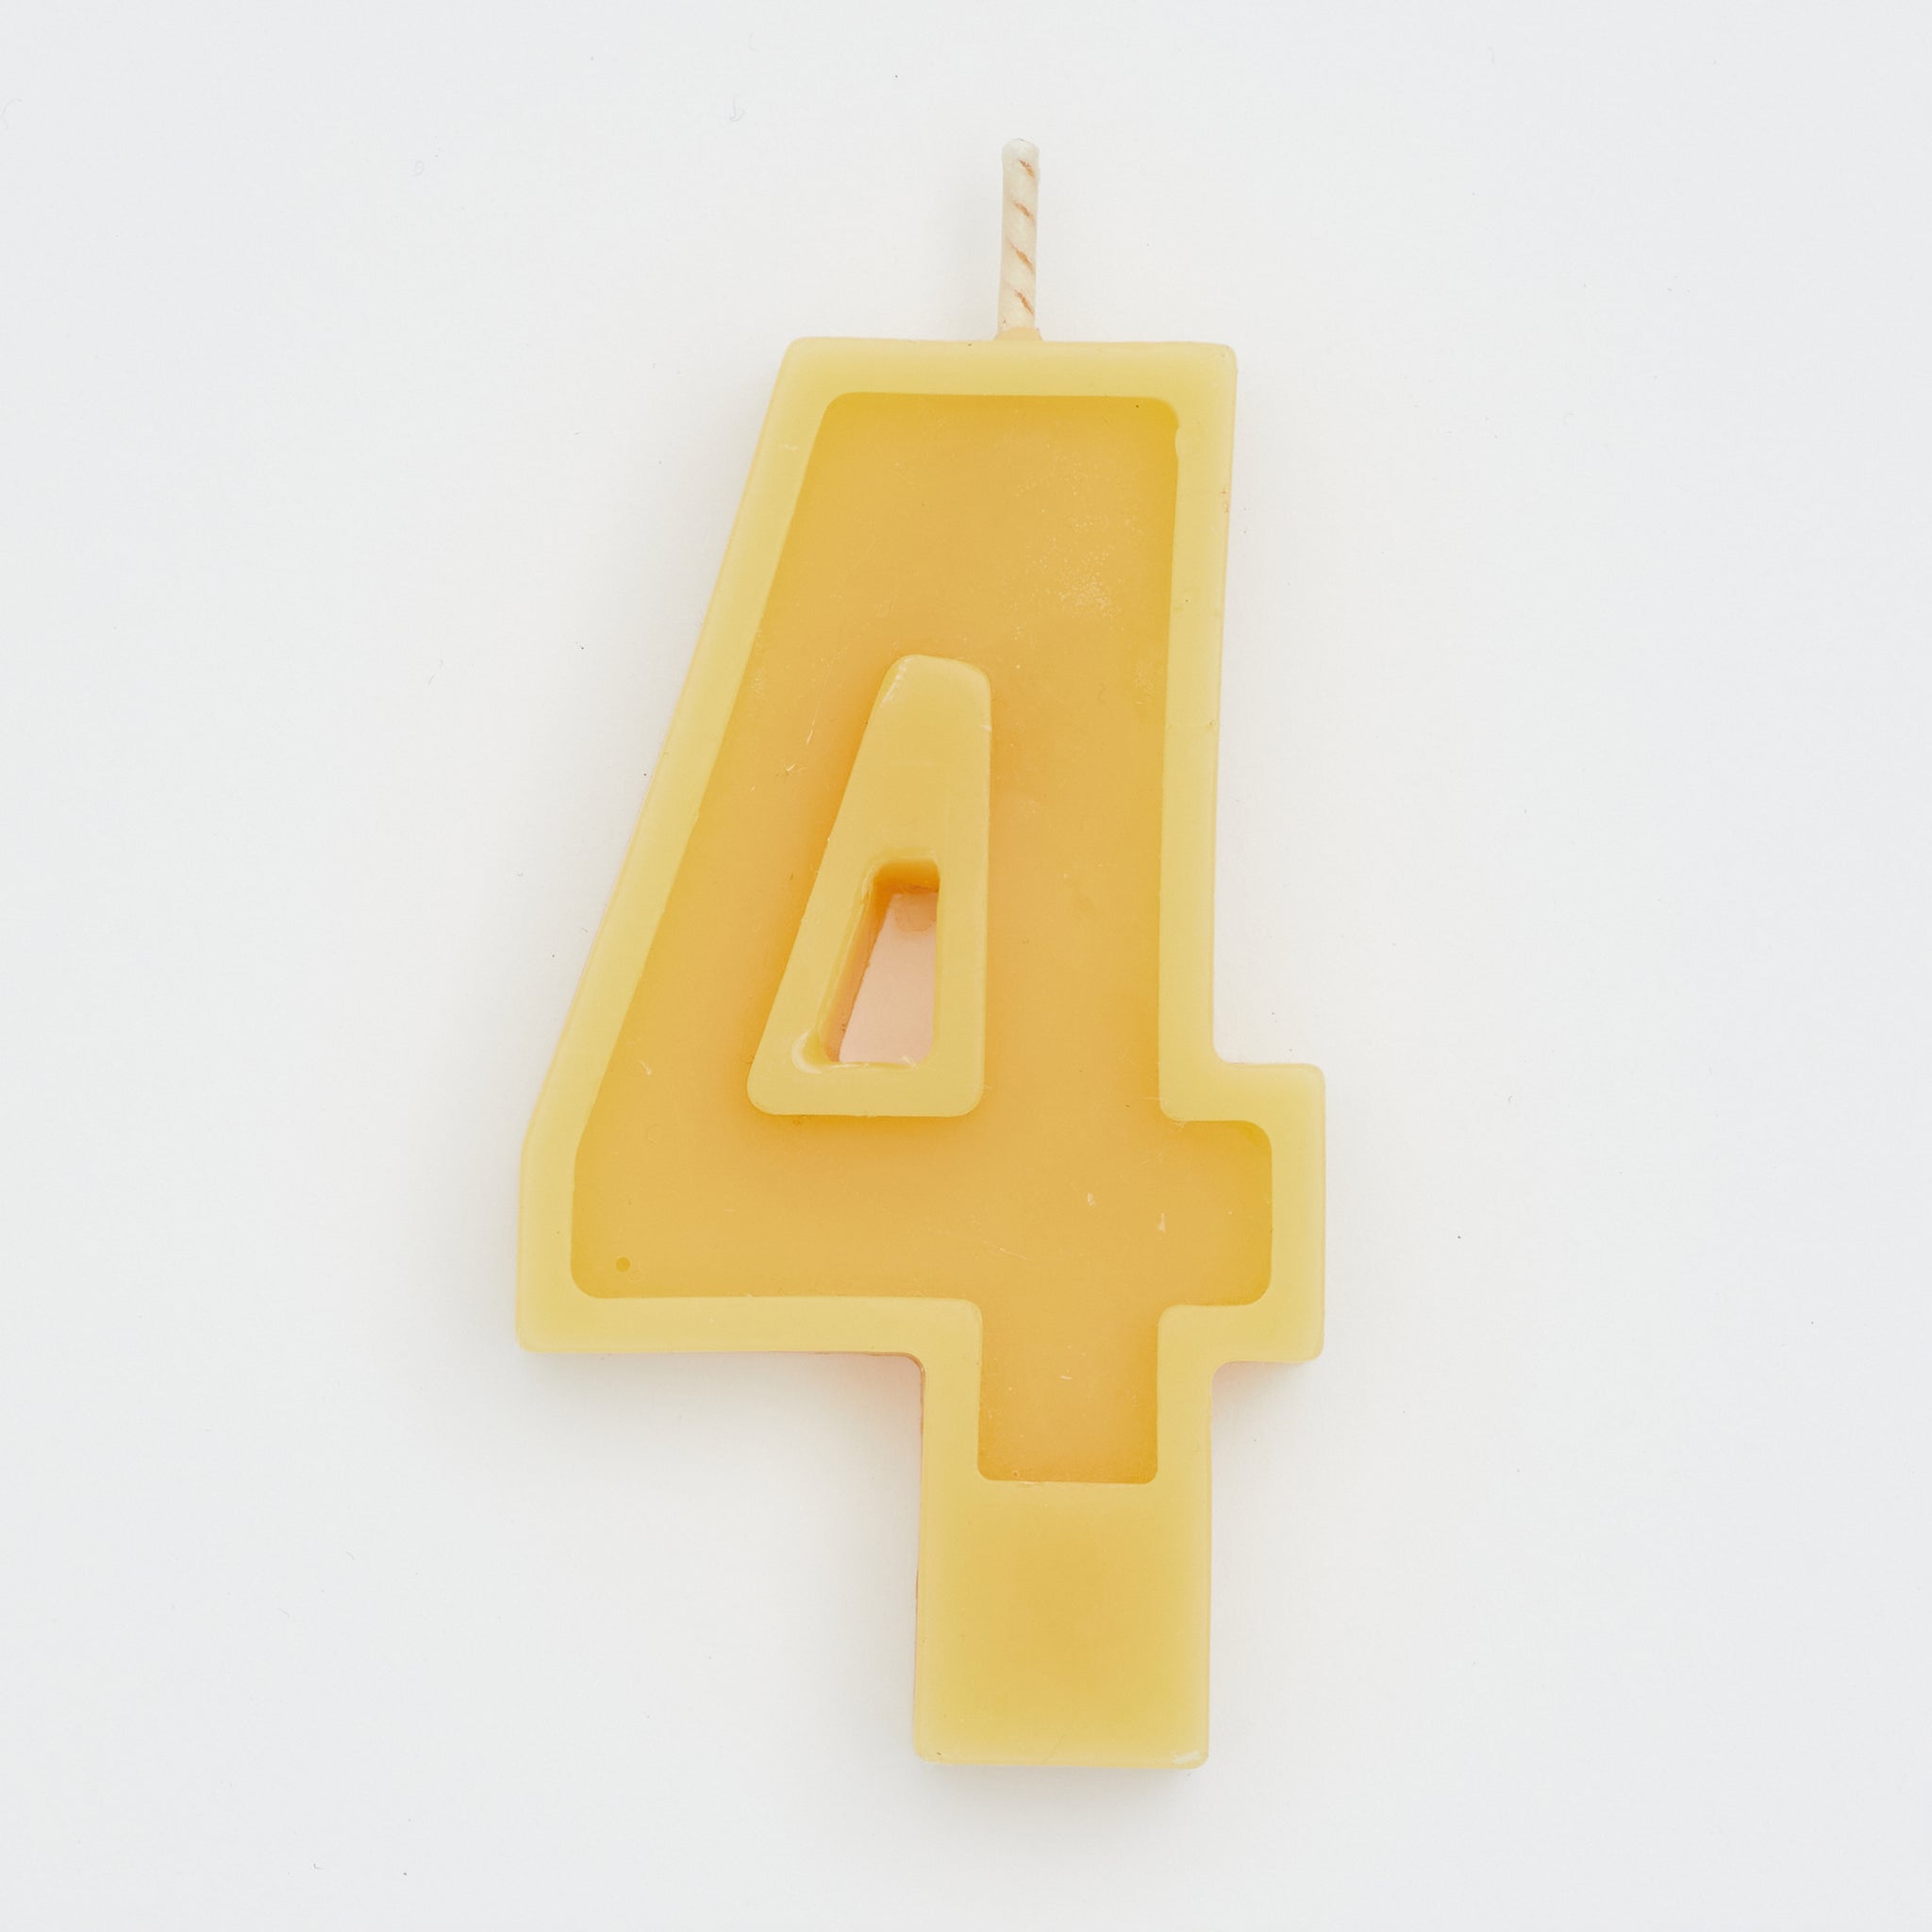 Blake & Mason Beeswax Celebration Number 4 Candles | made in Australia